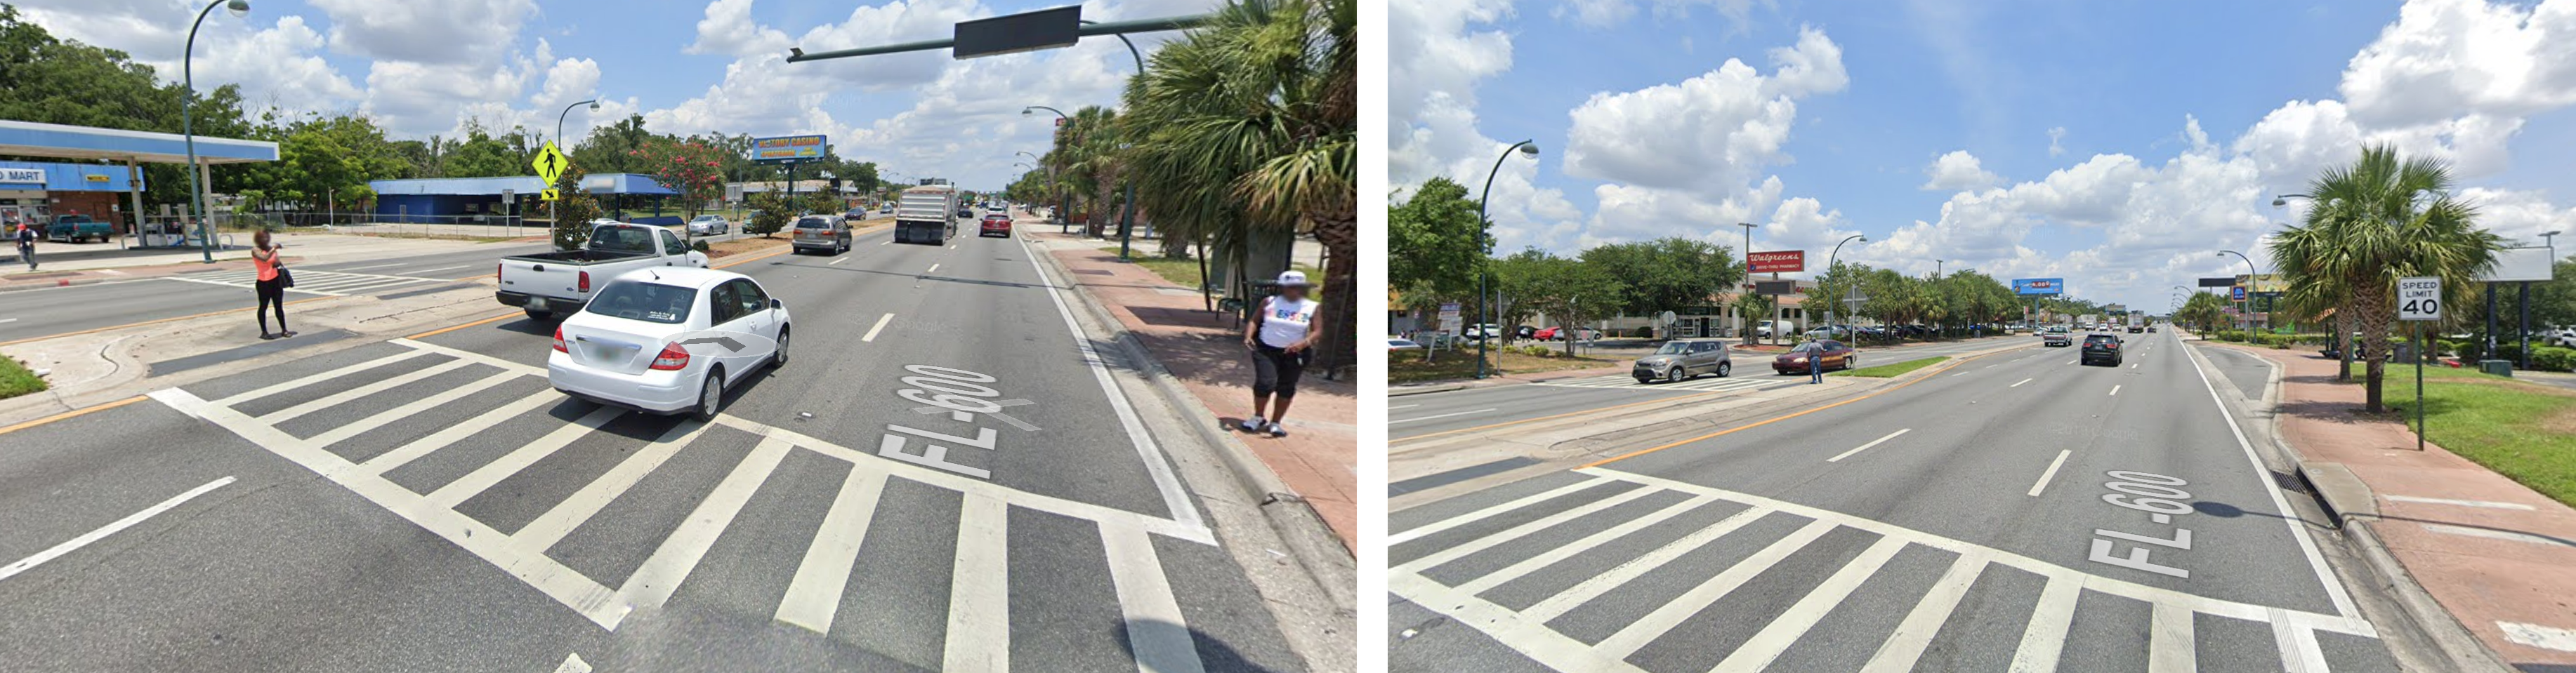 two images showing pedestrians attempting to cross the street.